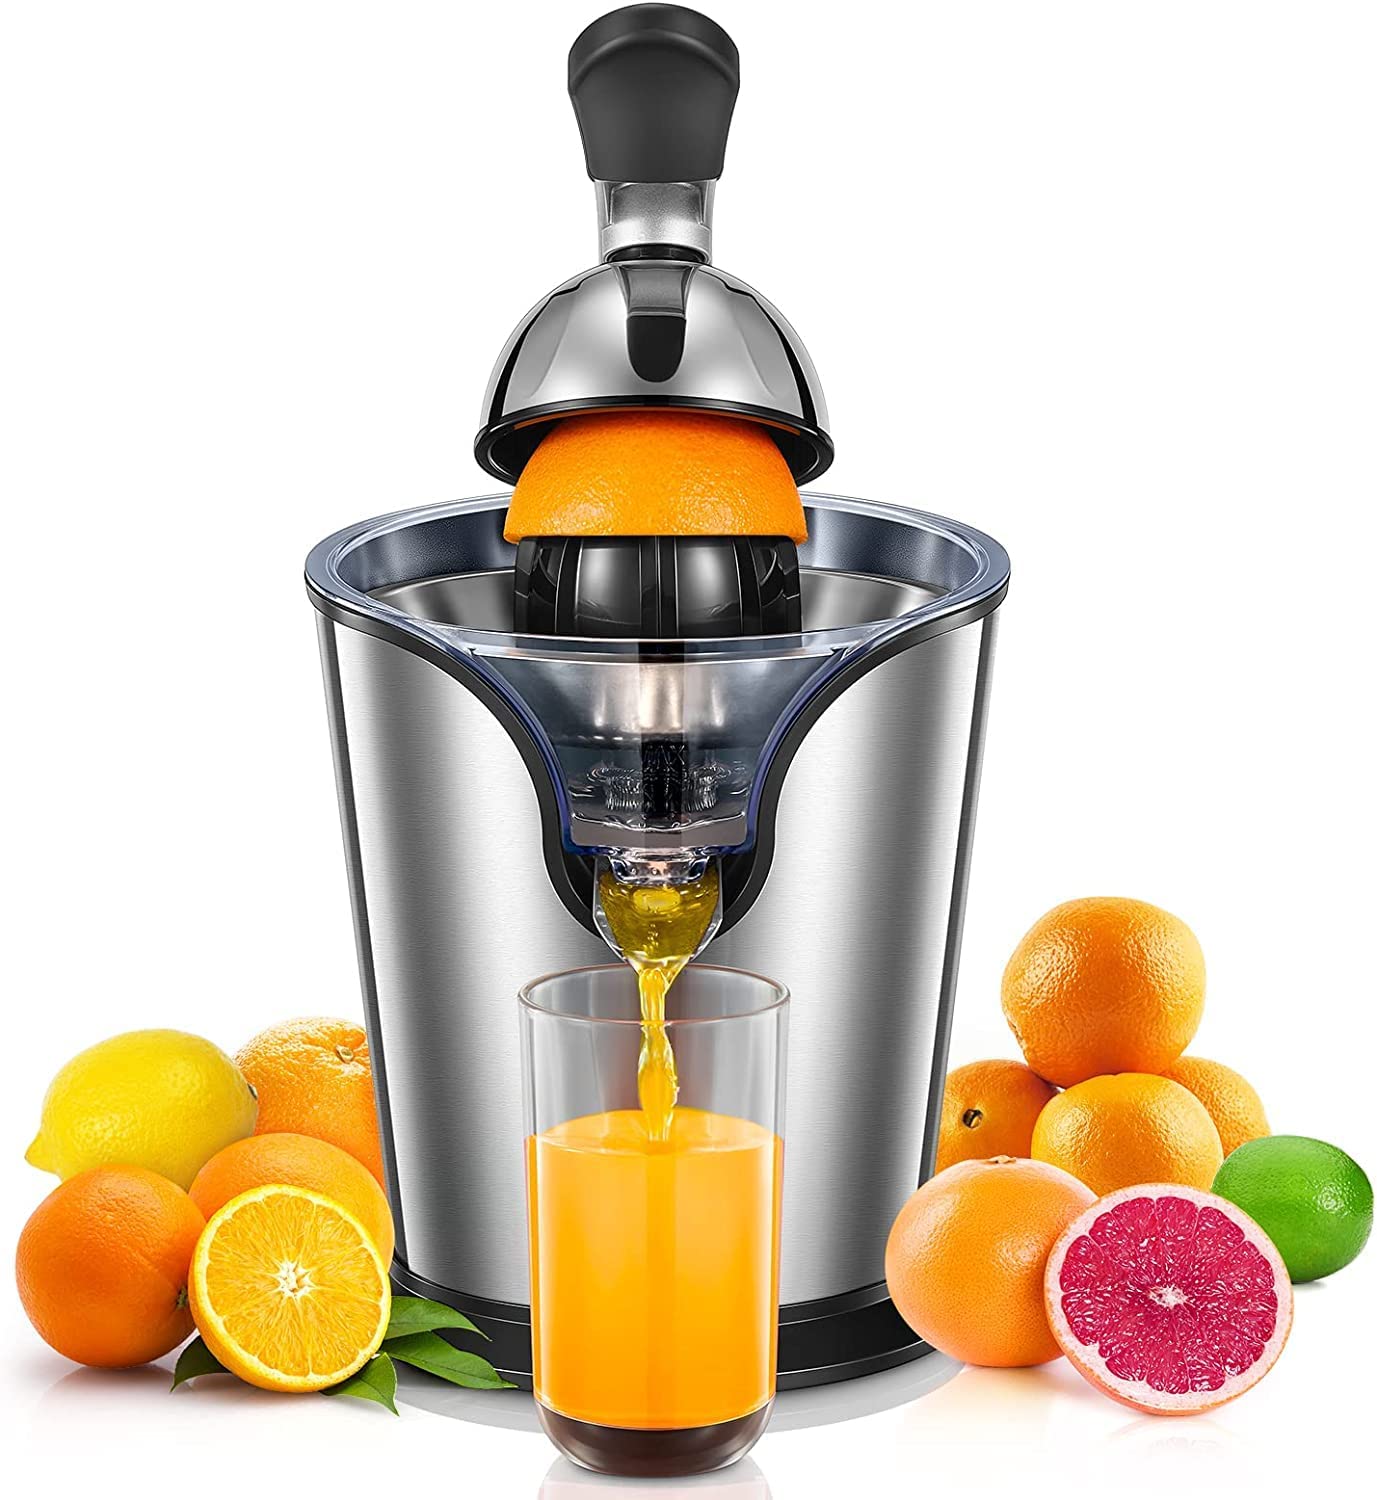 FOHERE Citrus Juicer Electric Orange Juicer Squeezer with Humanized Handle, Powerful 160W Silent Motor Stainless Steel BPA-Free, Two Size Cones for Grapefruits, Orange and Lemon, Silver